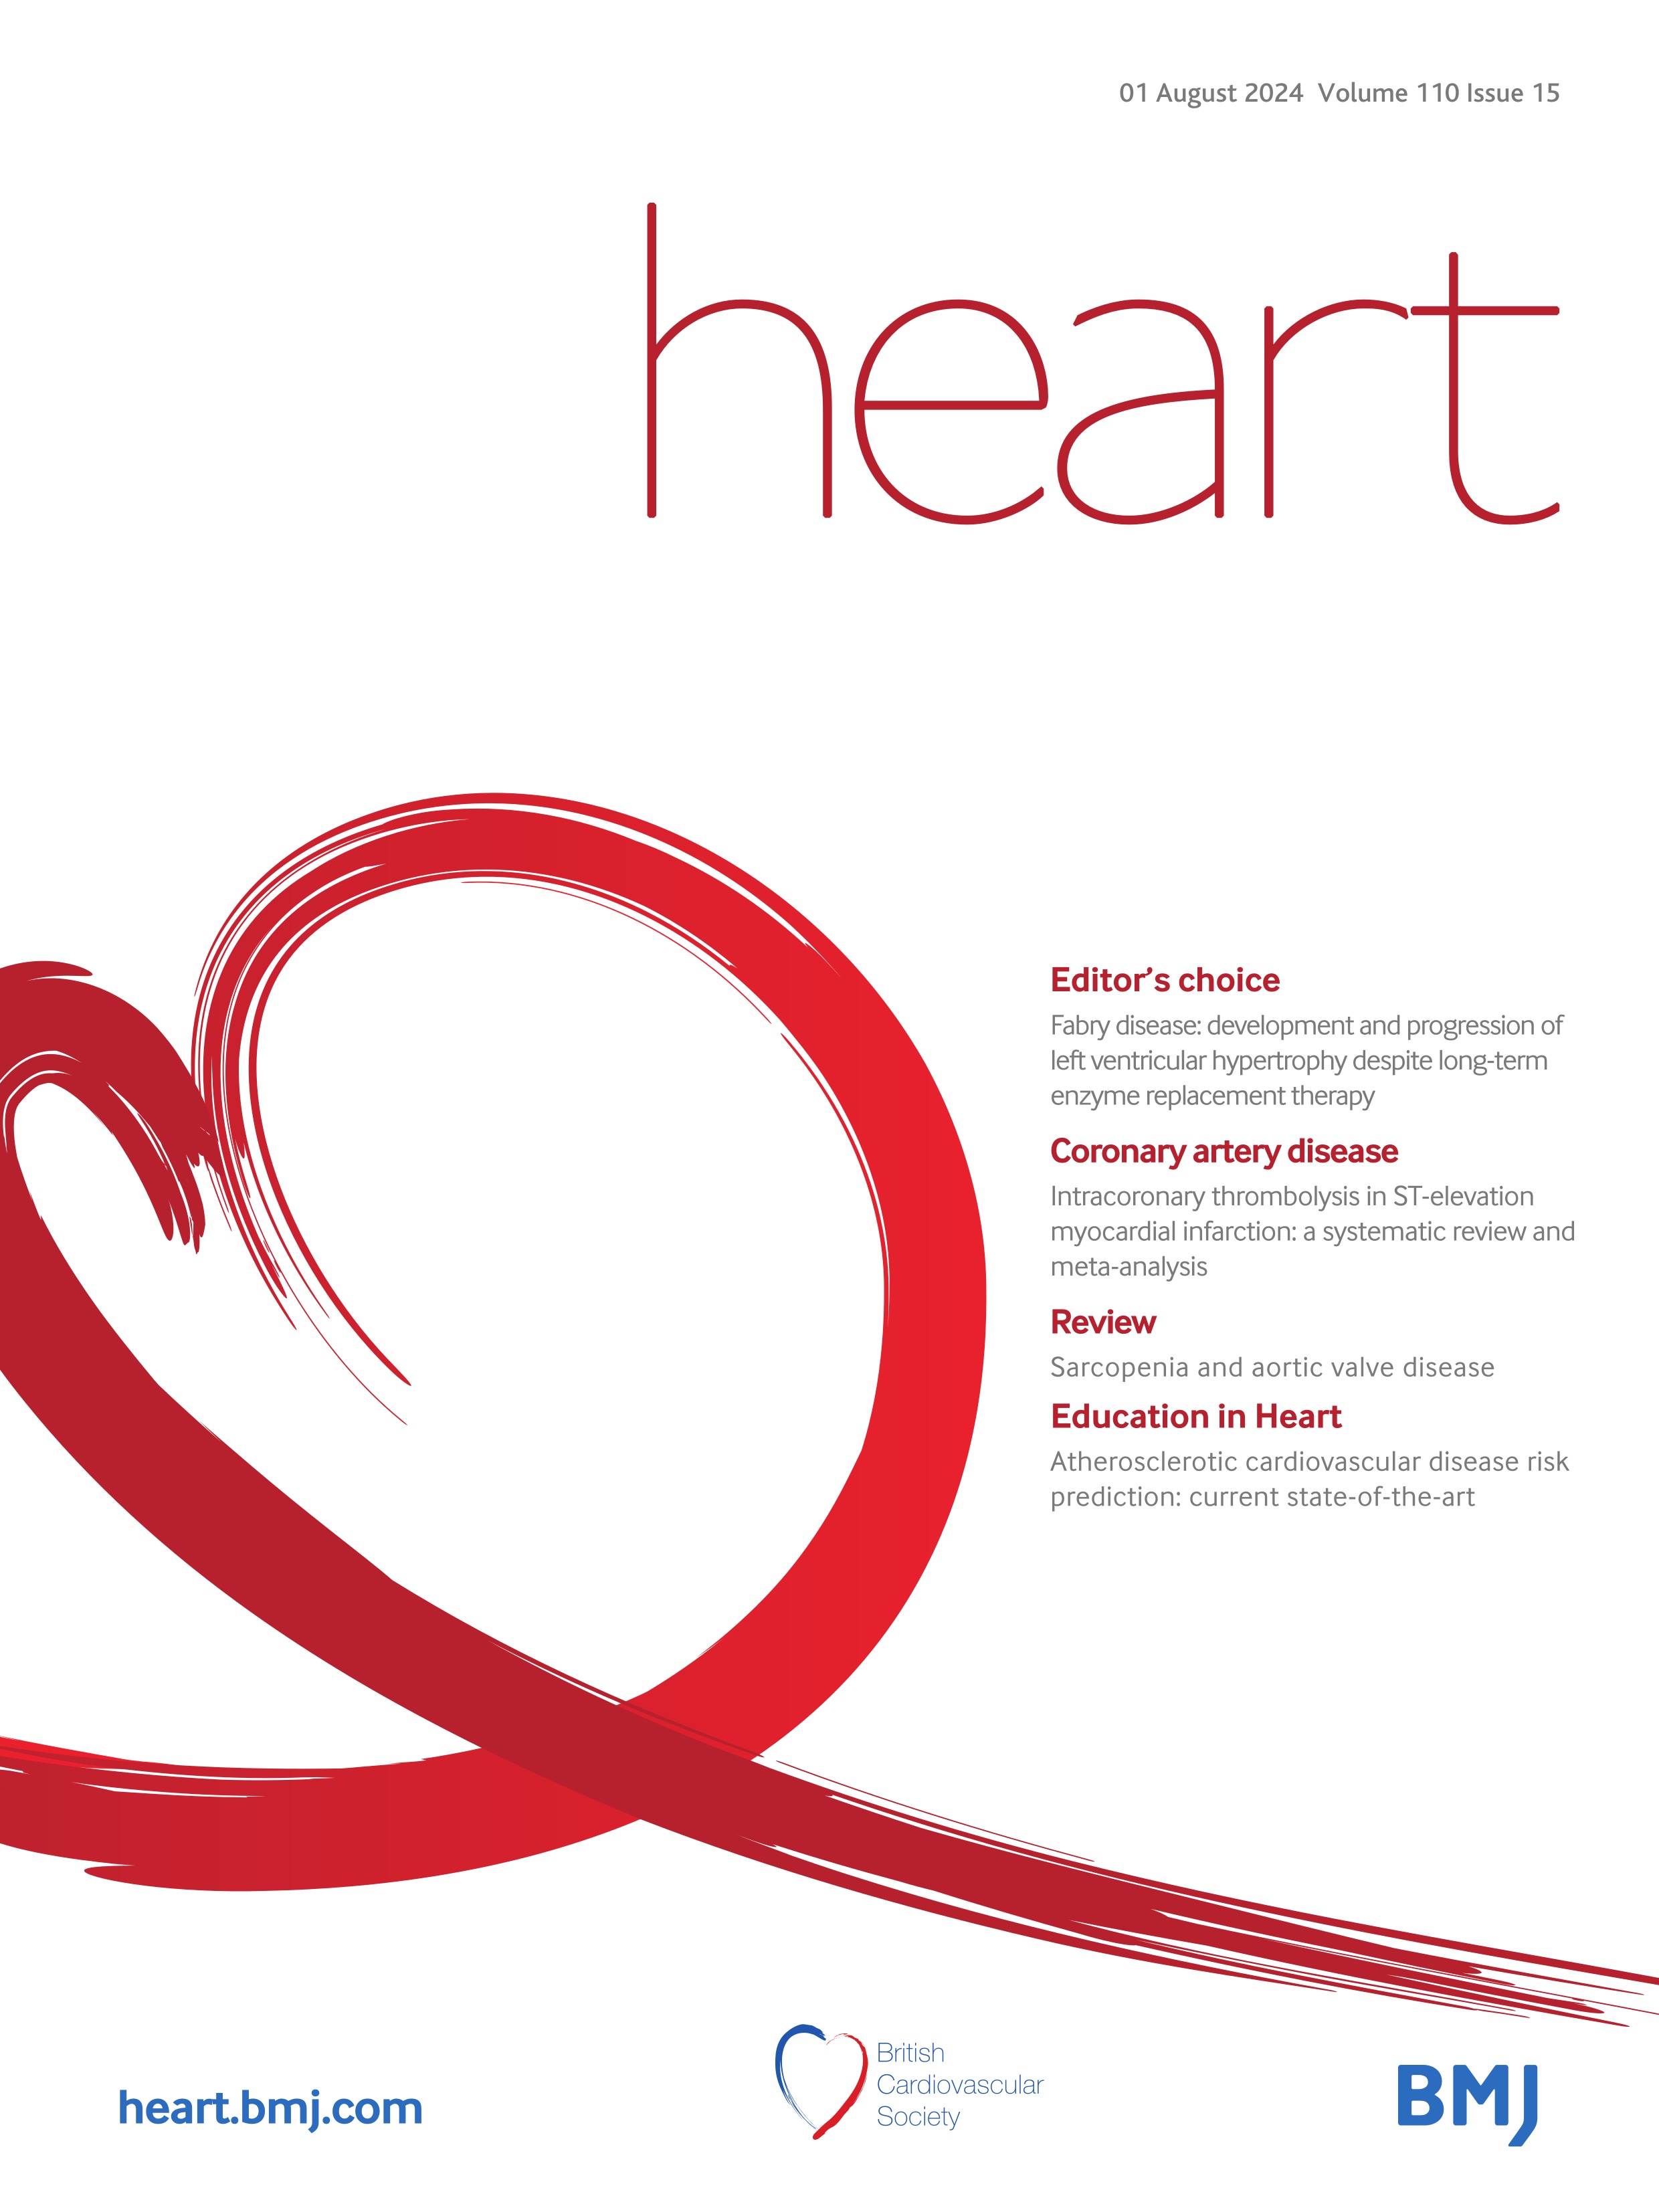 Enzyme replacement therapy in Fabry cardiomyopathy: an incomplete treatment